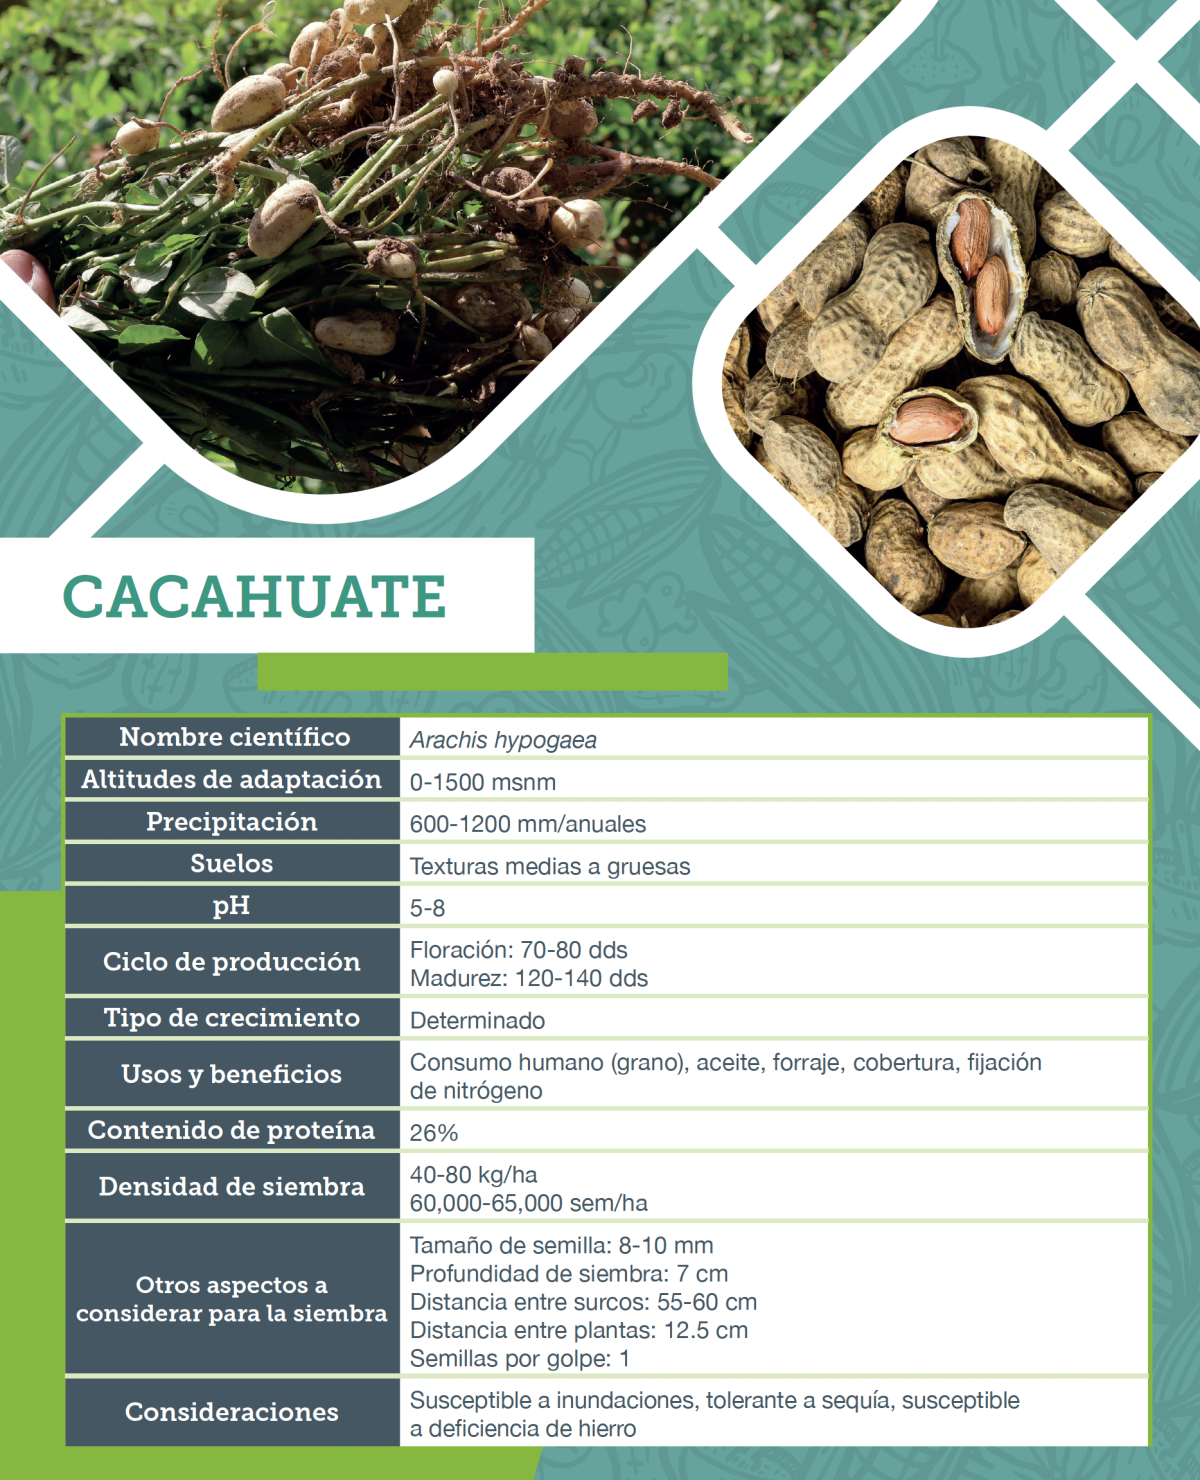 Cacahuate. Ficha agronómica.